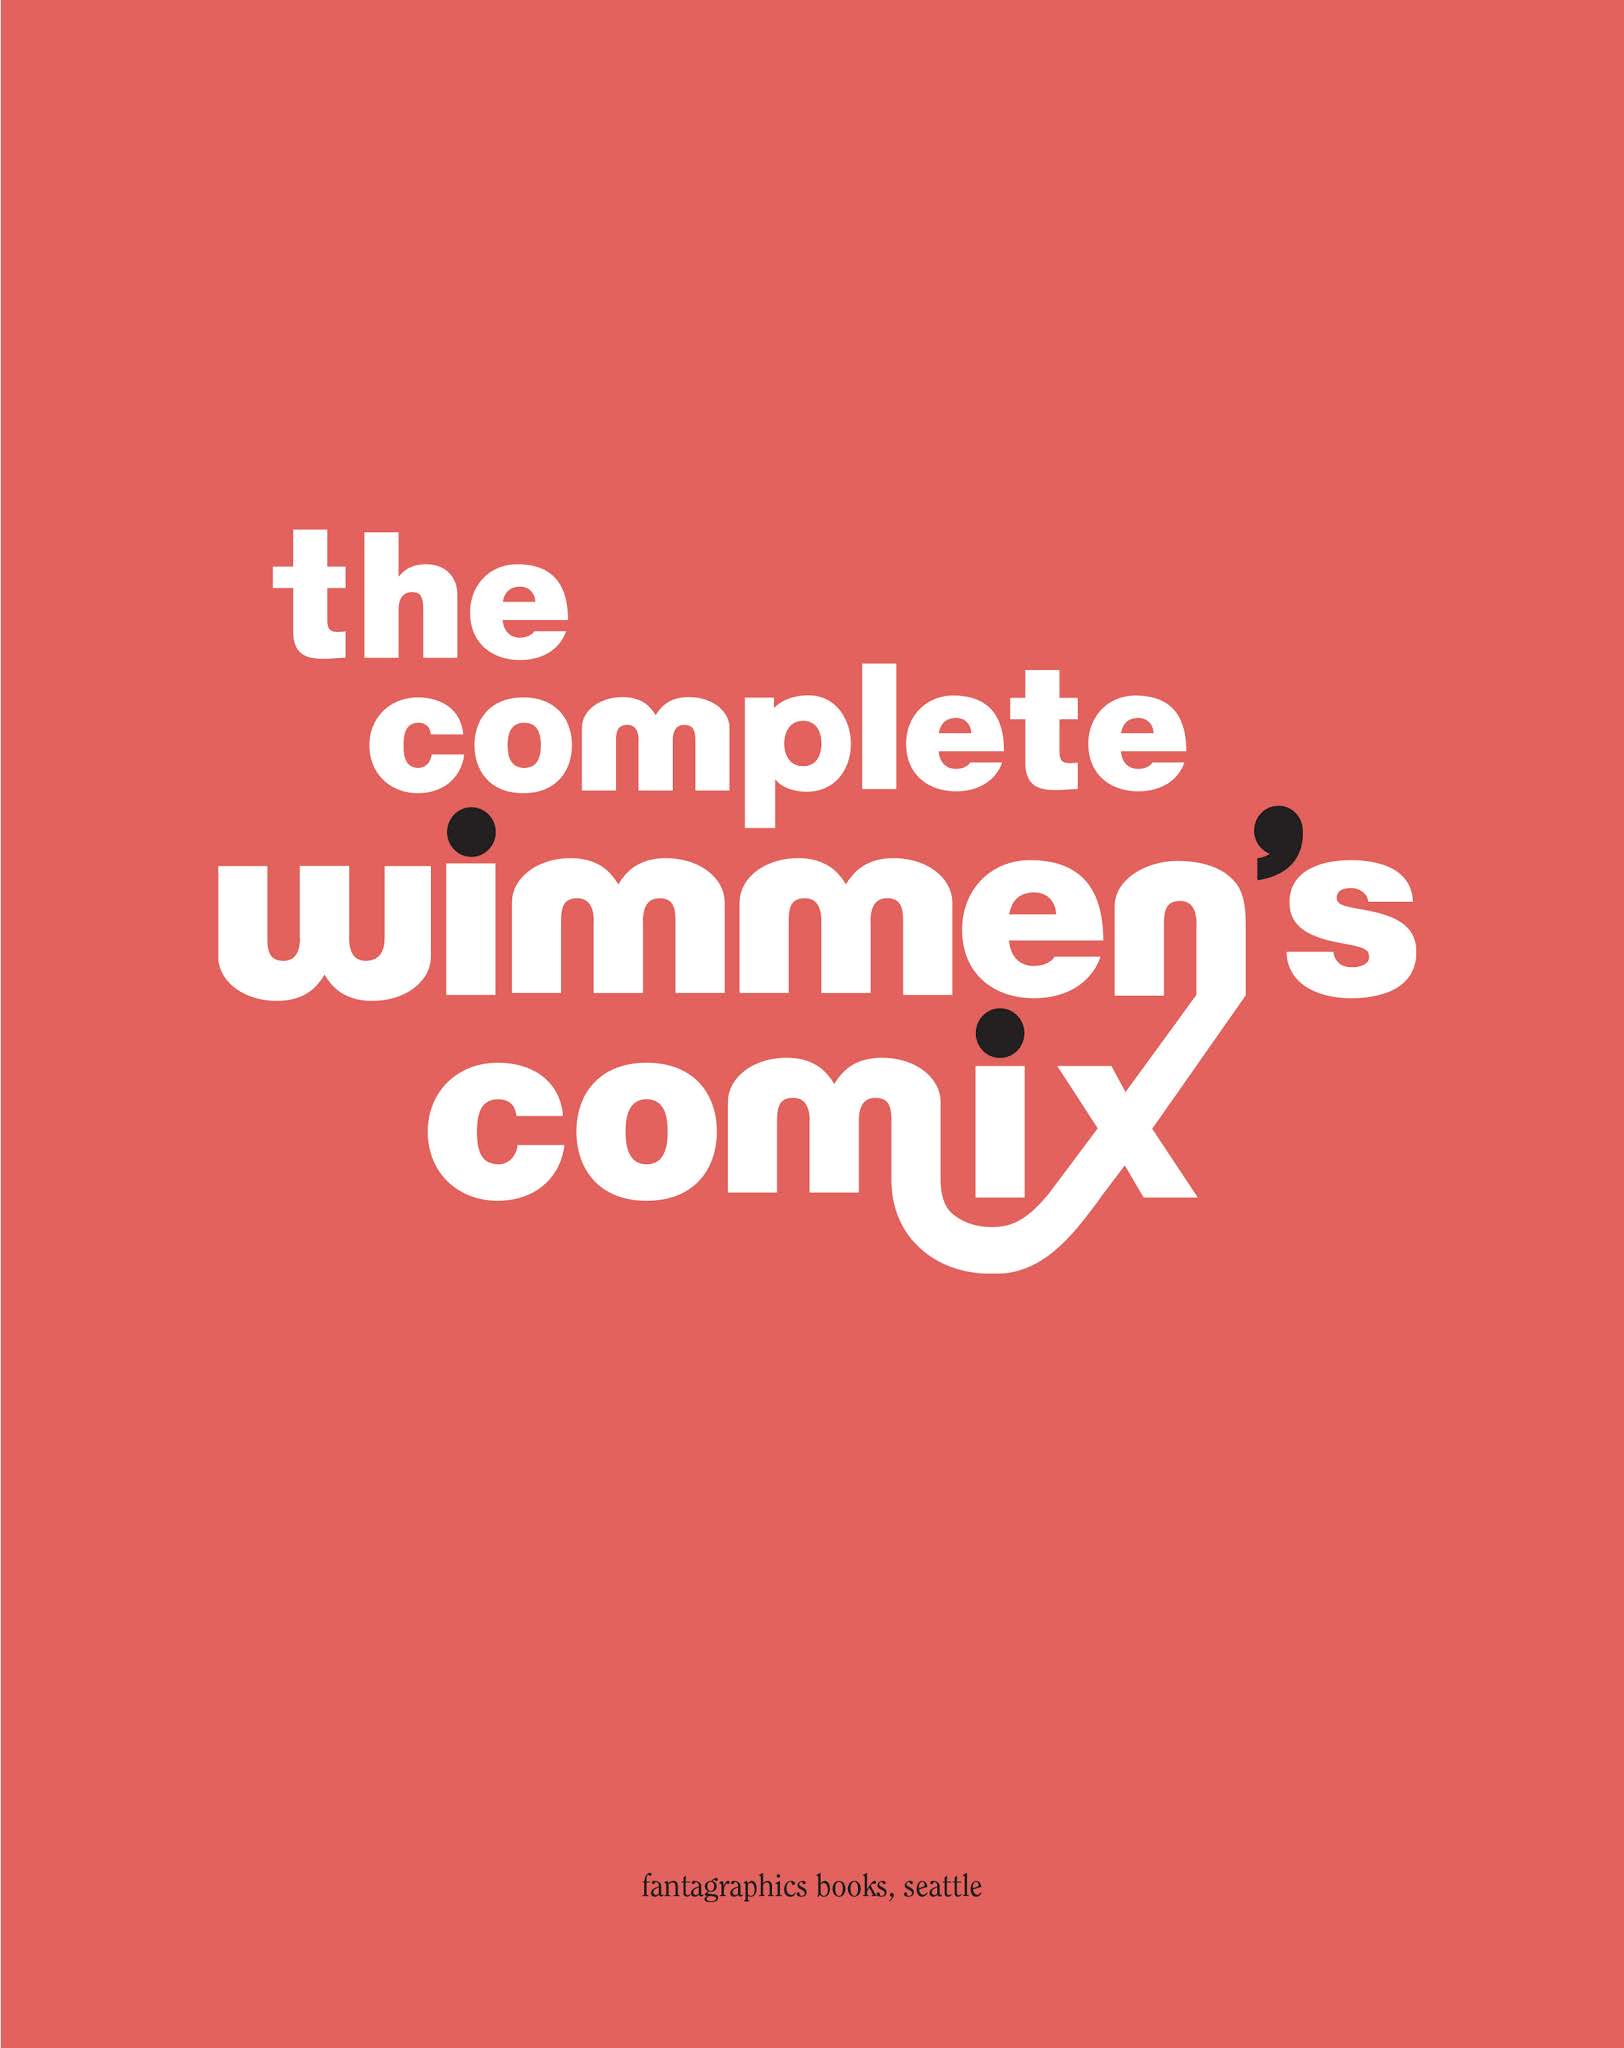 Read online The Complete Wimmen's Comix comic -  Issue # TPB 1 - 5